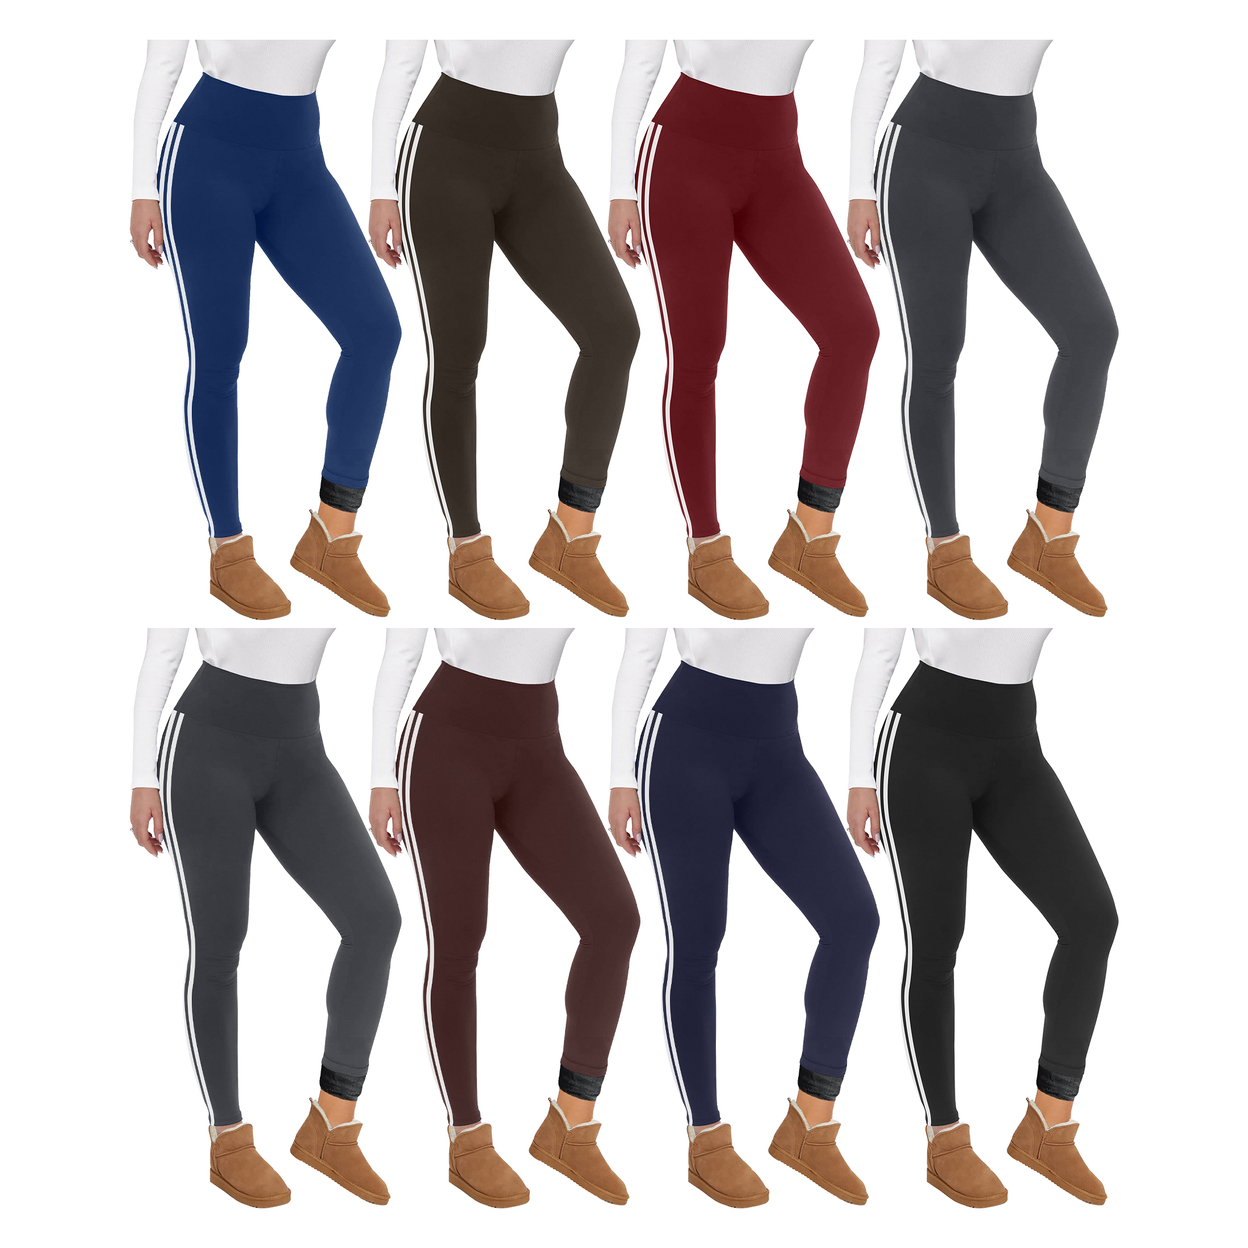 3-Pack: Women's Ultra Soft Winter Warm Cozy Striped Fur Lined Yoga Leggings - Assorted, Small